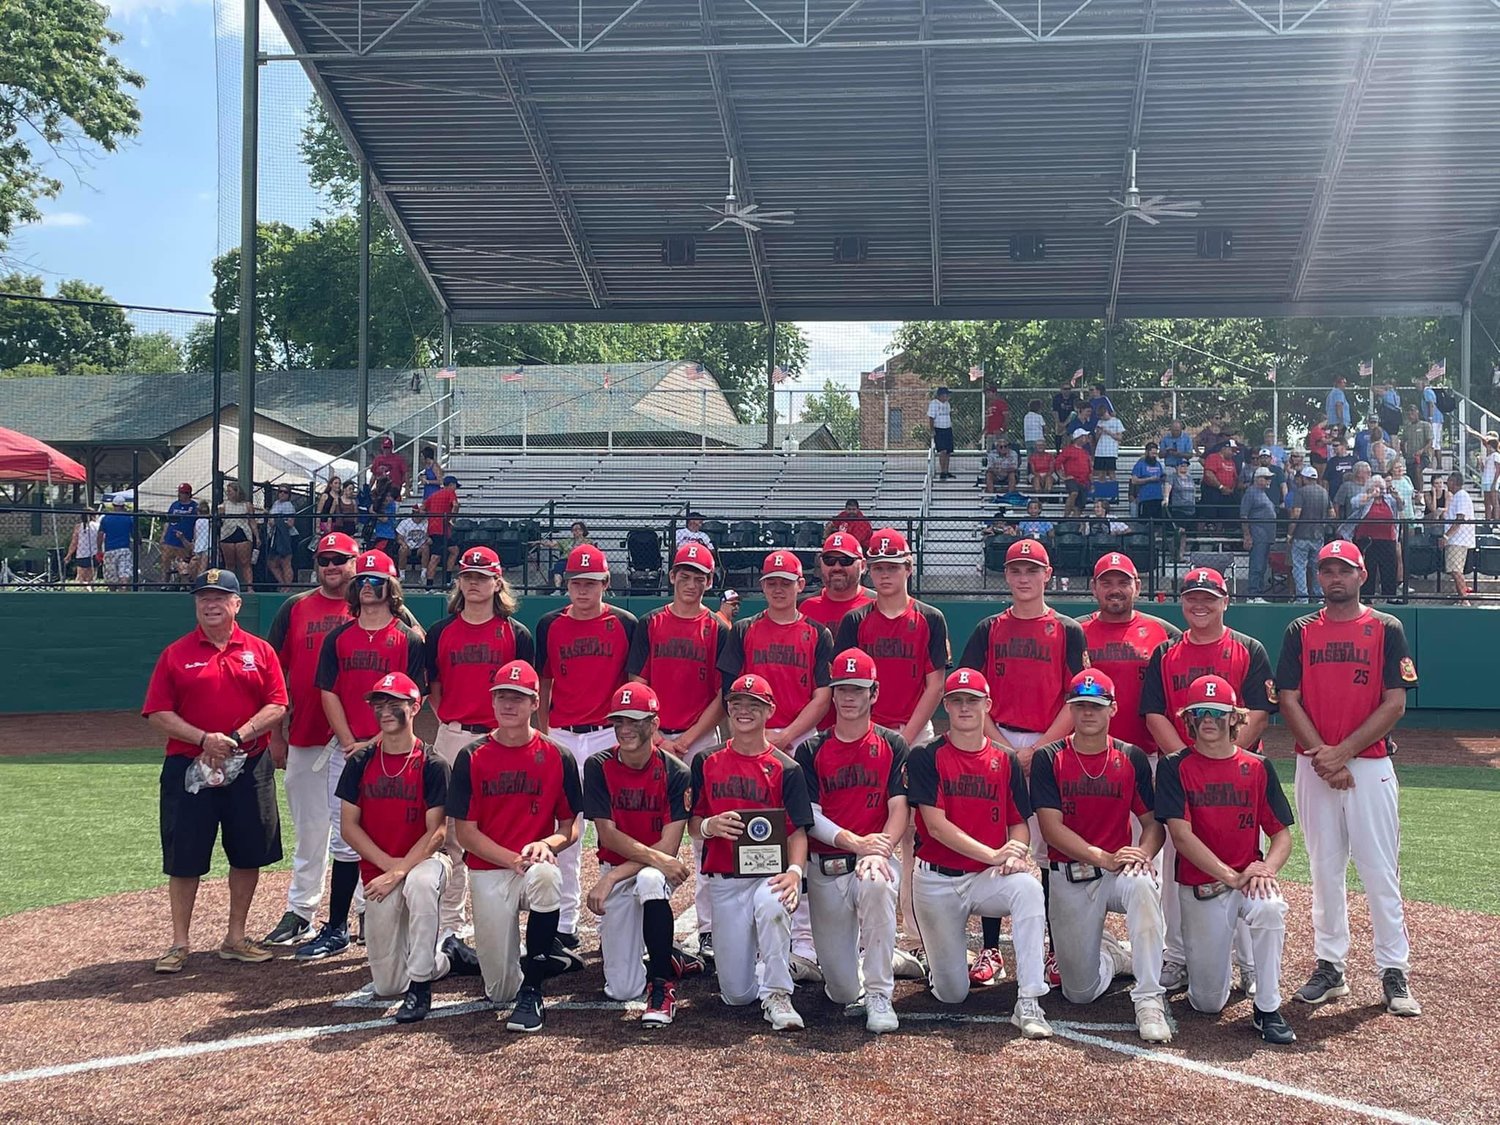 The AA Junior-Red legion team that took second in state is shown. Members of the team are DJ Barth (14), Trent Albrecht (28), Camden Palmer (6), Walker Chandler (5), Carson White (4), Cayden Palmer (1), Gavin Marshall (50), Zach Gibson (13), Gavin Woodson (15), Noah Taylor (10), Logan Havican (20), Brady Creech (27), Kyle Thompson (3), Landon Niederer (33), Nate Wibbenmeyer (24), Alex Kinnie (7). Assistant coaches are Bill Woodson, Shaun Marshall, Jason Howard and Tracy Hunter. Head coach is Chad Creech.